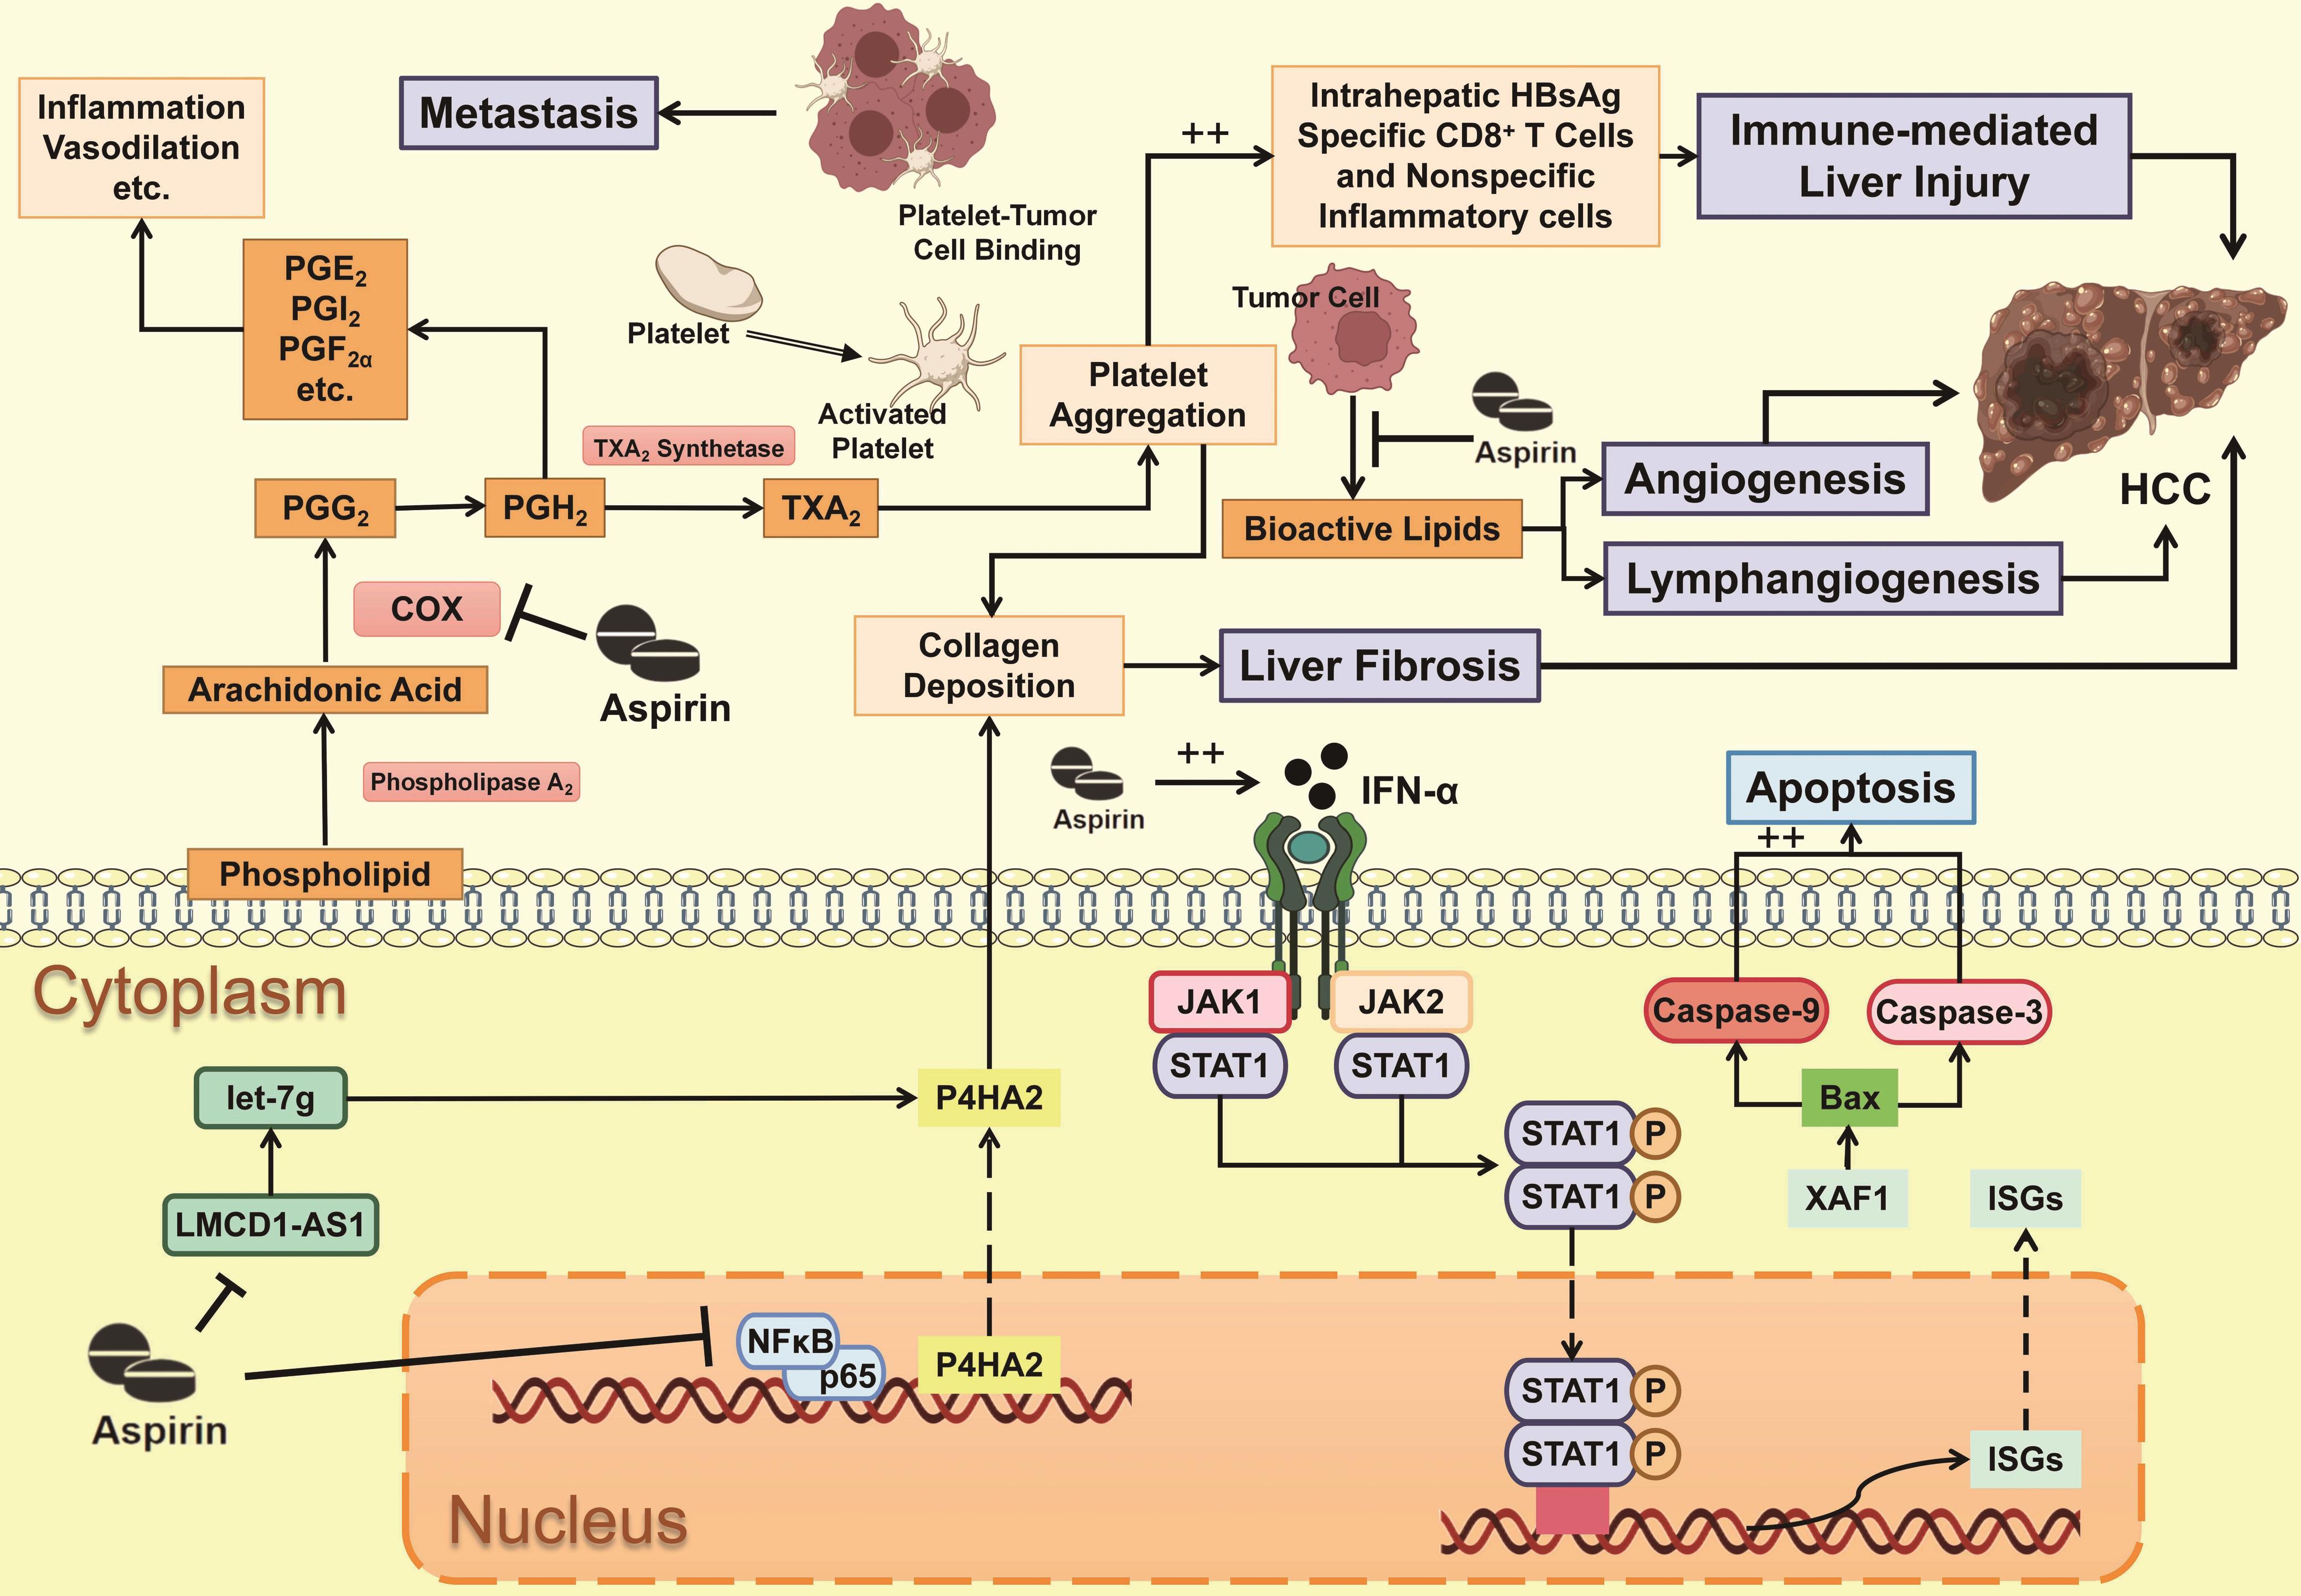 Mechanisms and pathways of the chemoprotective effect of aspirin in HCC.